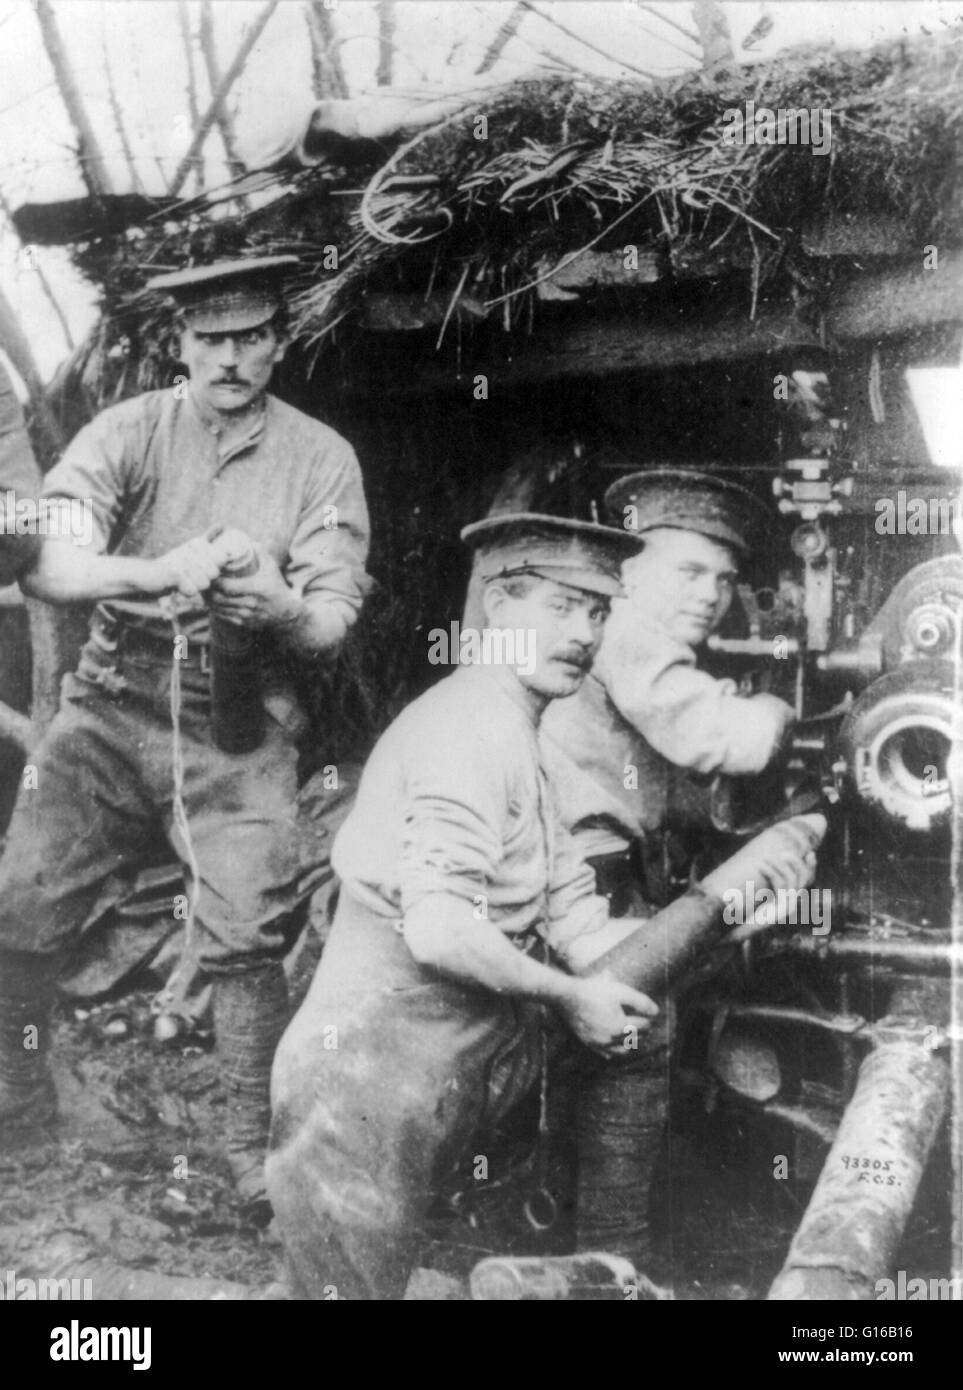 British soldiers loading a cannon or howitzer in a camouflaged bunker, 1915. The onset of trench warfare after the first few months of First World War greatly increased the demand for howitzers that gave a steep angle of descent, which were better suited Stock Photo